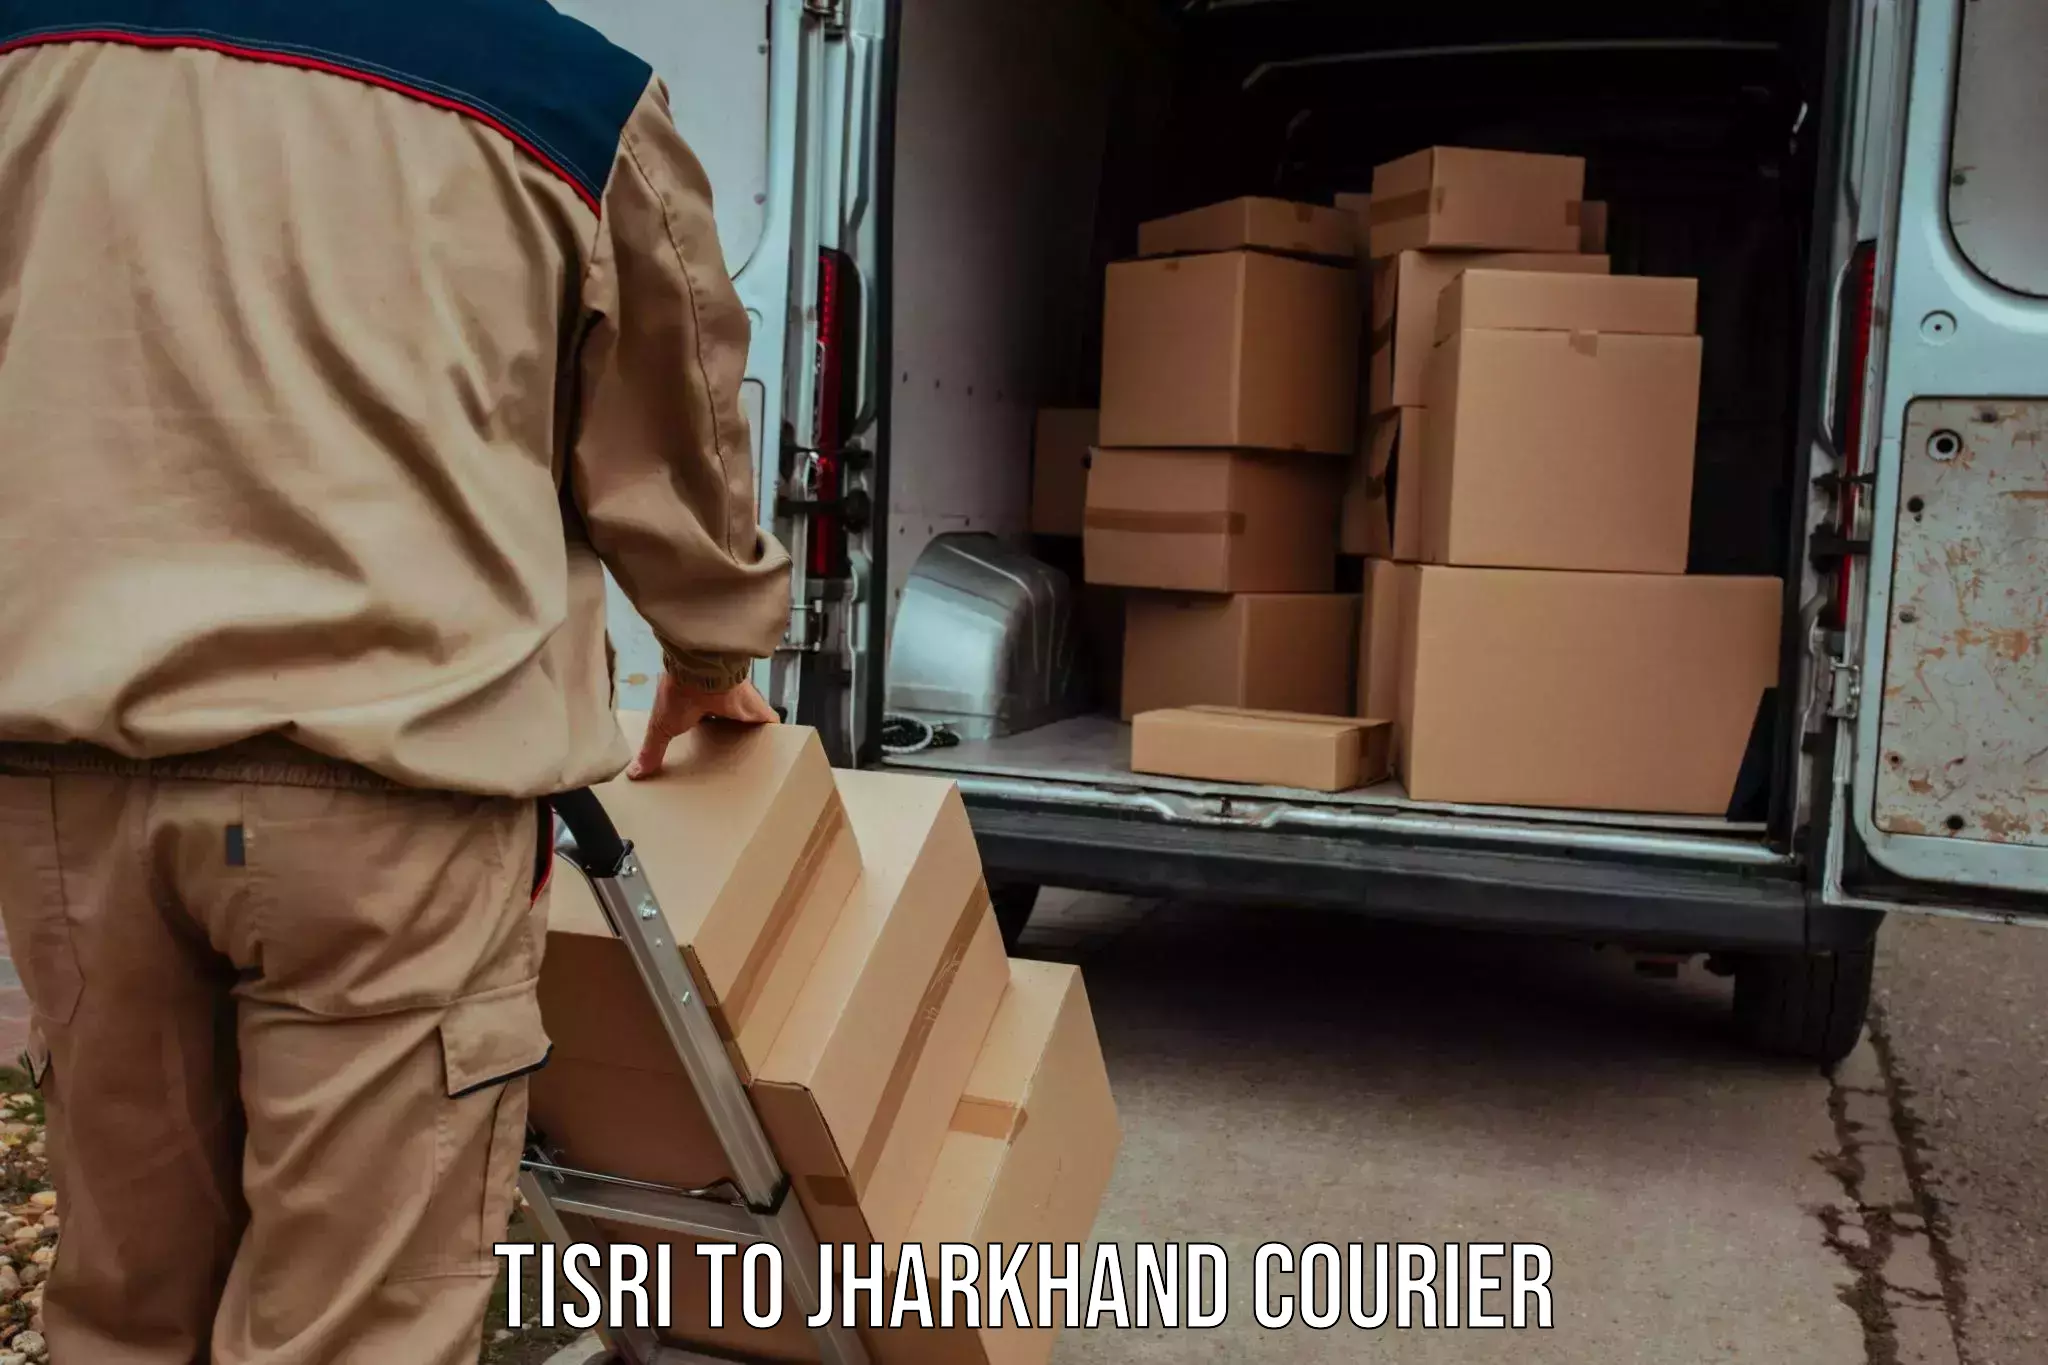 24/7 courier service in Tisri to Mahagama